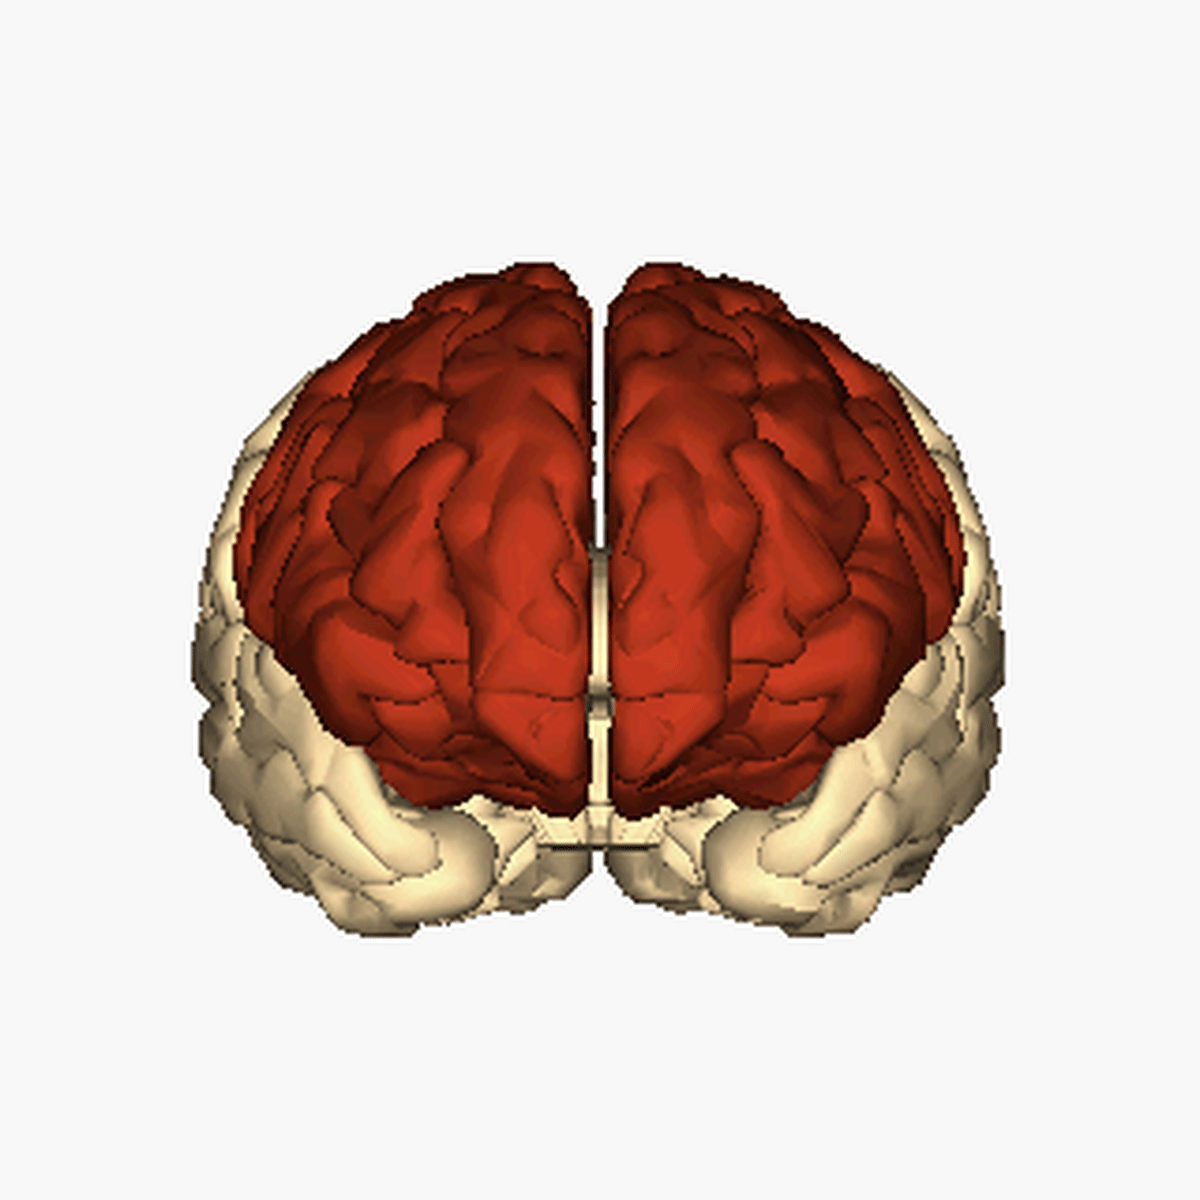 frontal lobes in both the regions of cerebrum